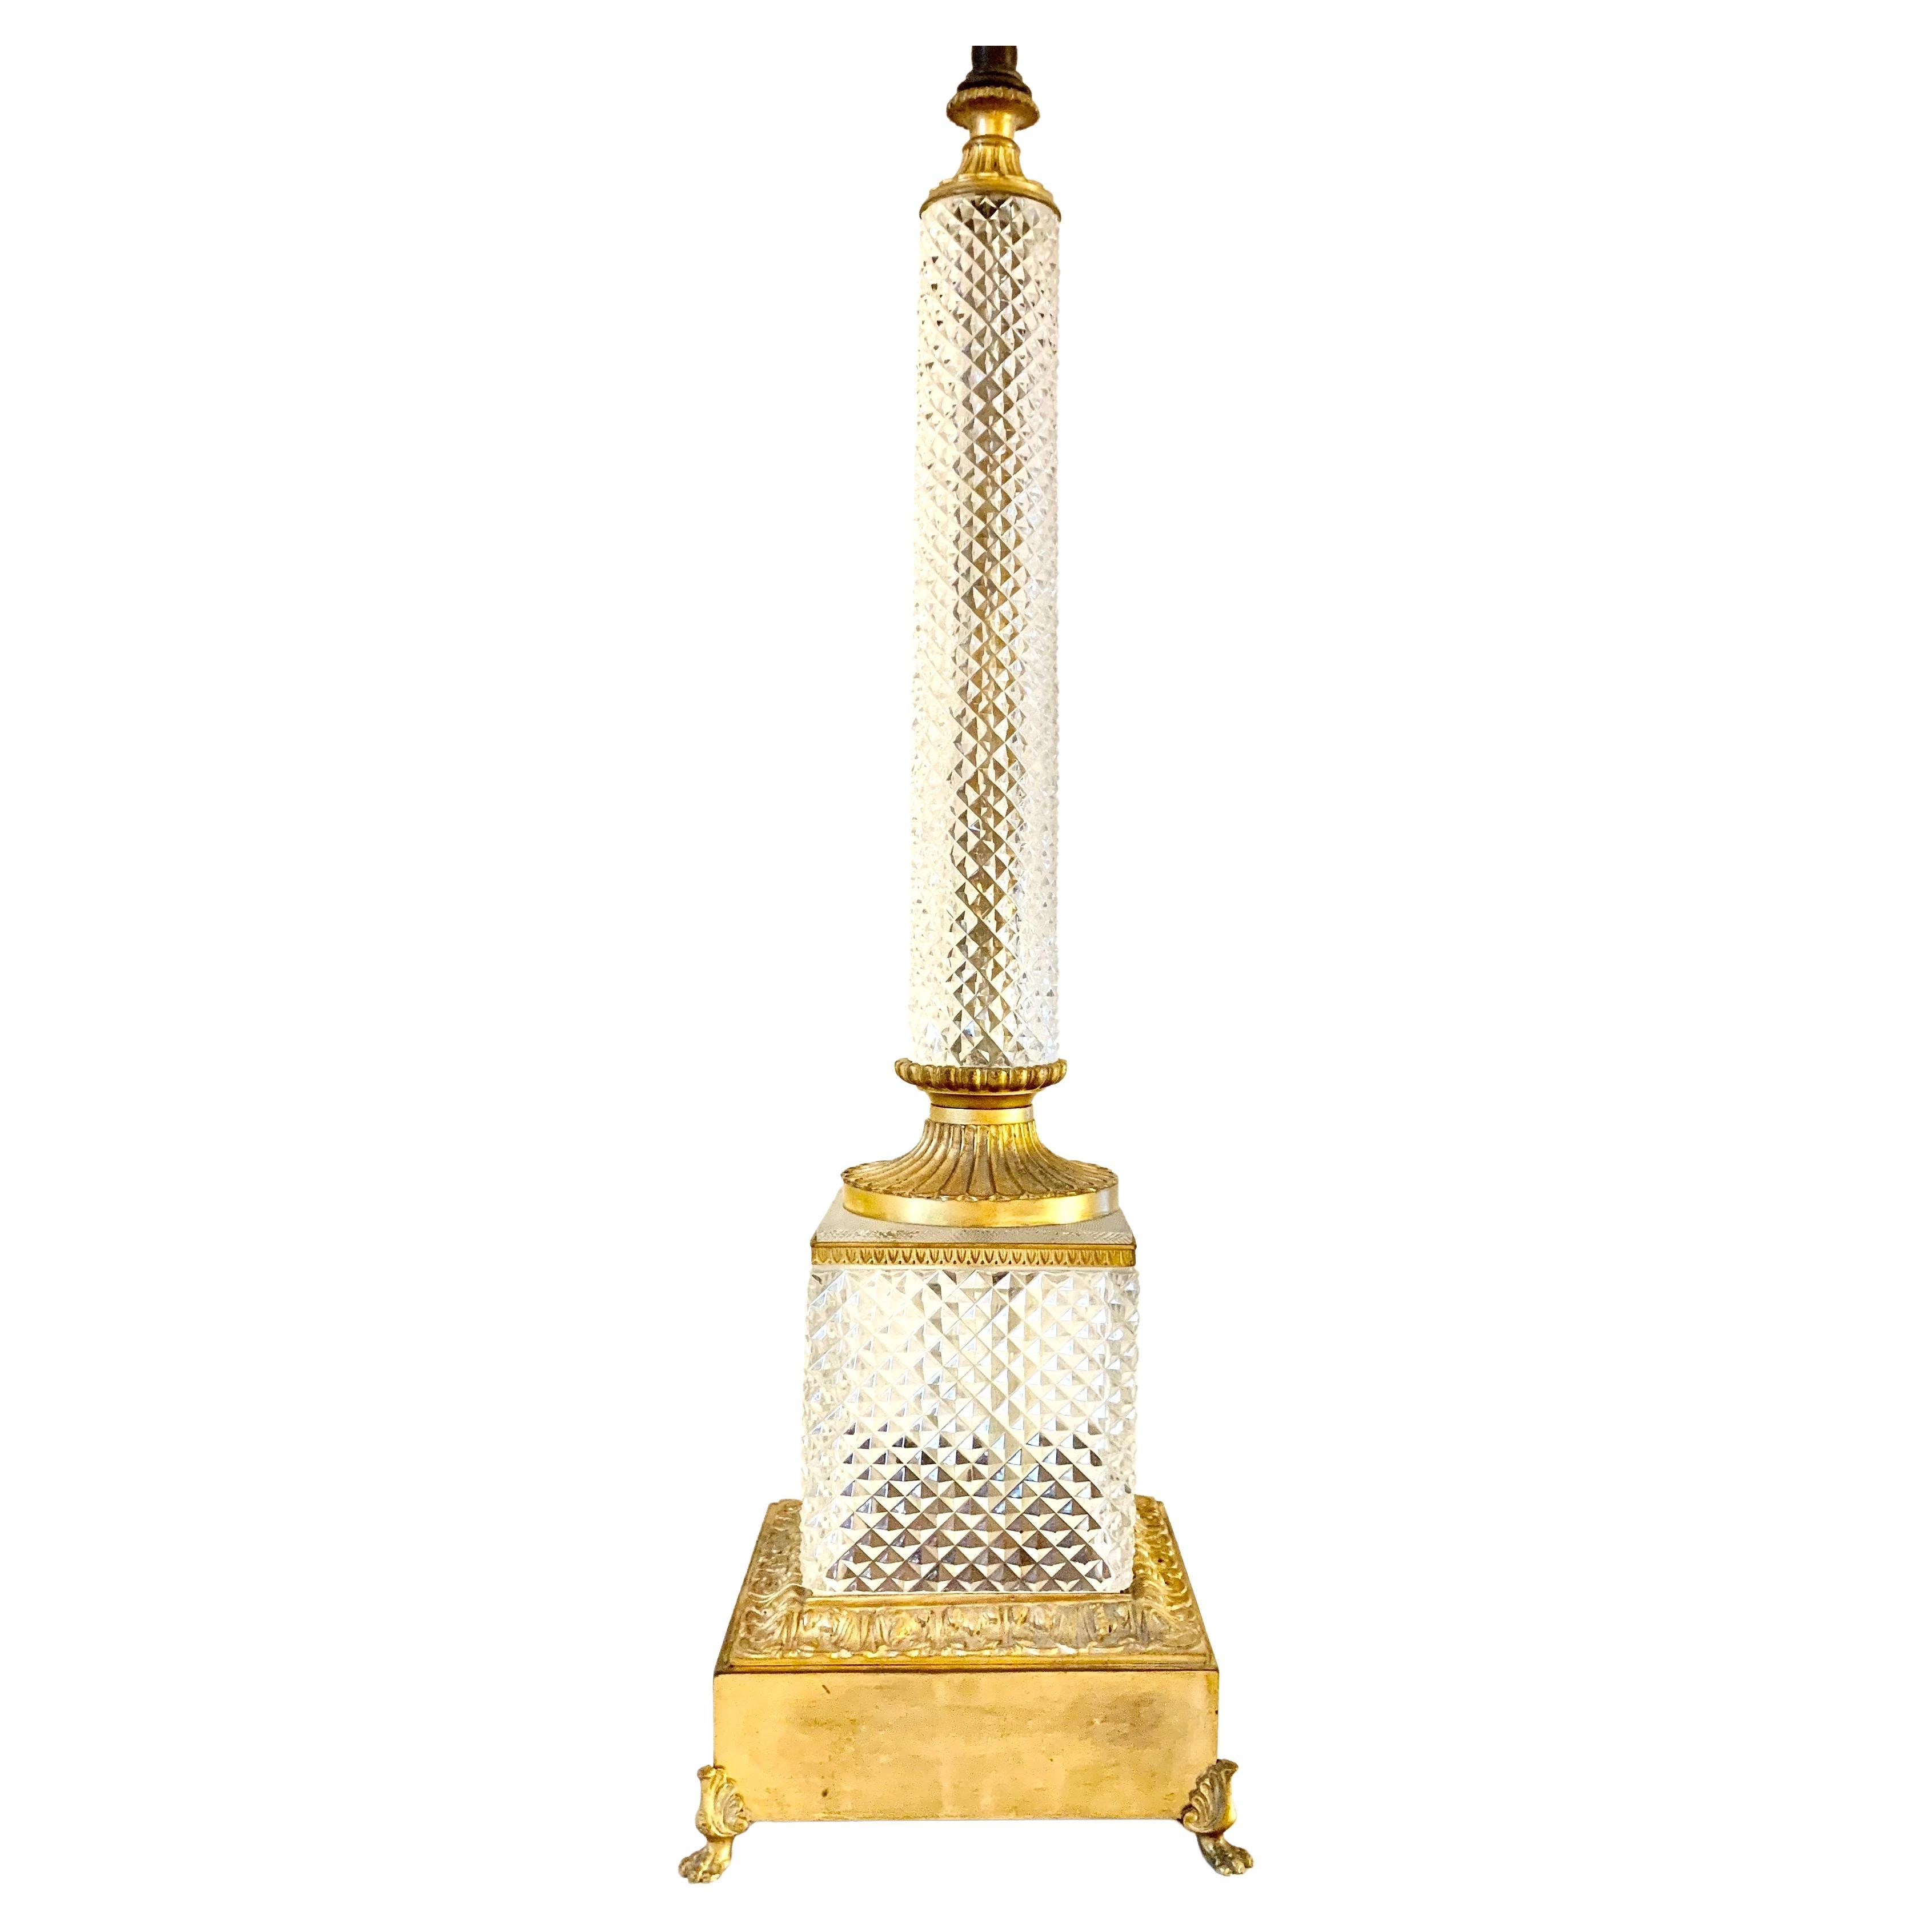 Palace Size Antique Neoclassical Style Gilt Bronze Cut Crystal Column Table Lamp